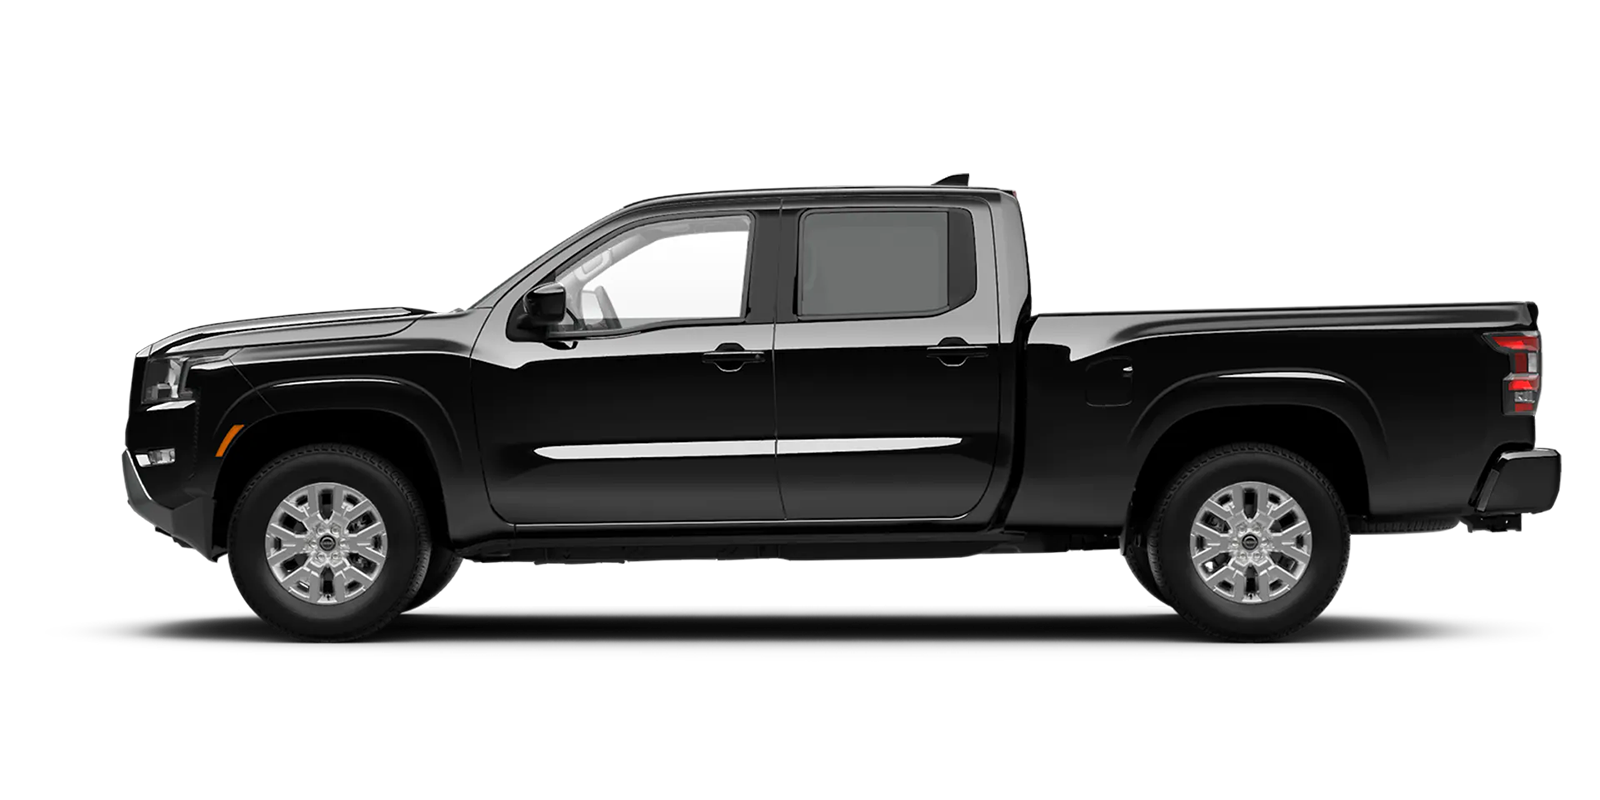 2022 Frontier Crew Cab Long Bed SV 4x4 in Super Black | Mitchell Nissan in Enterprise AL